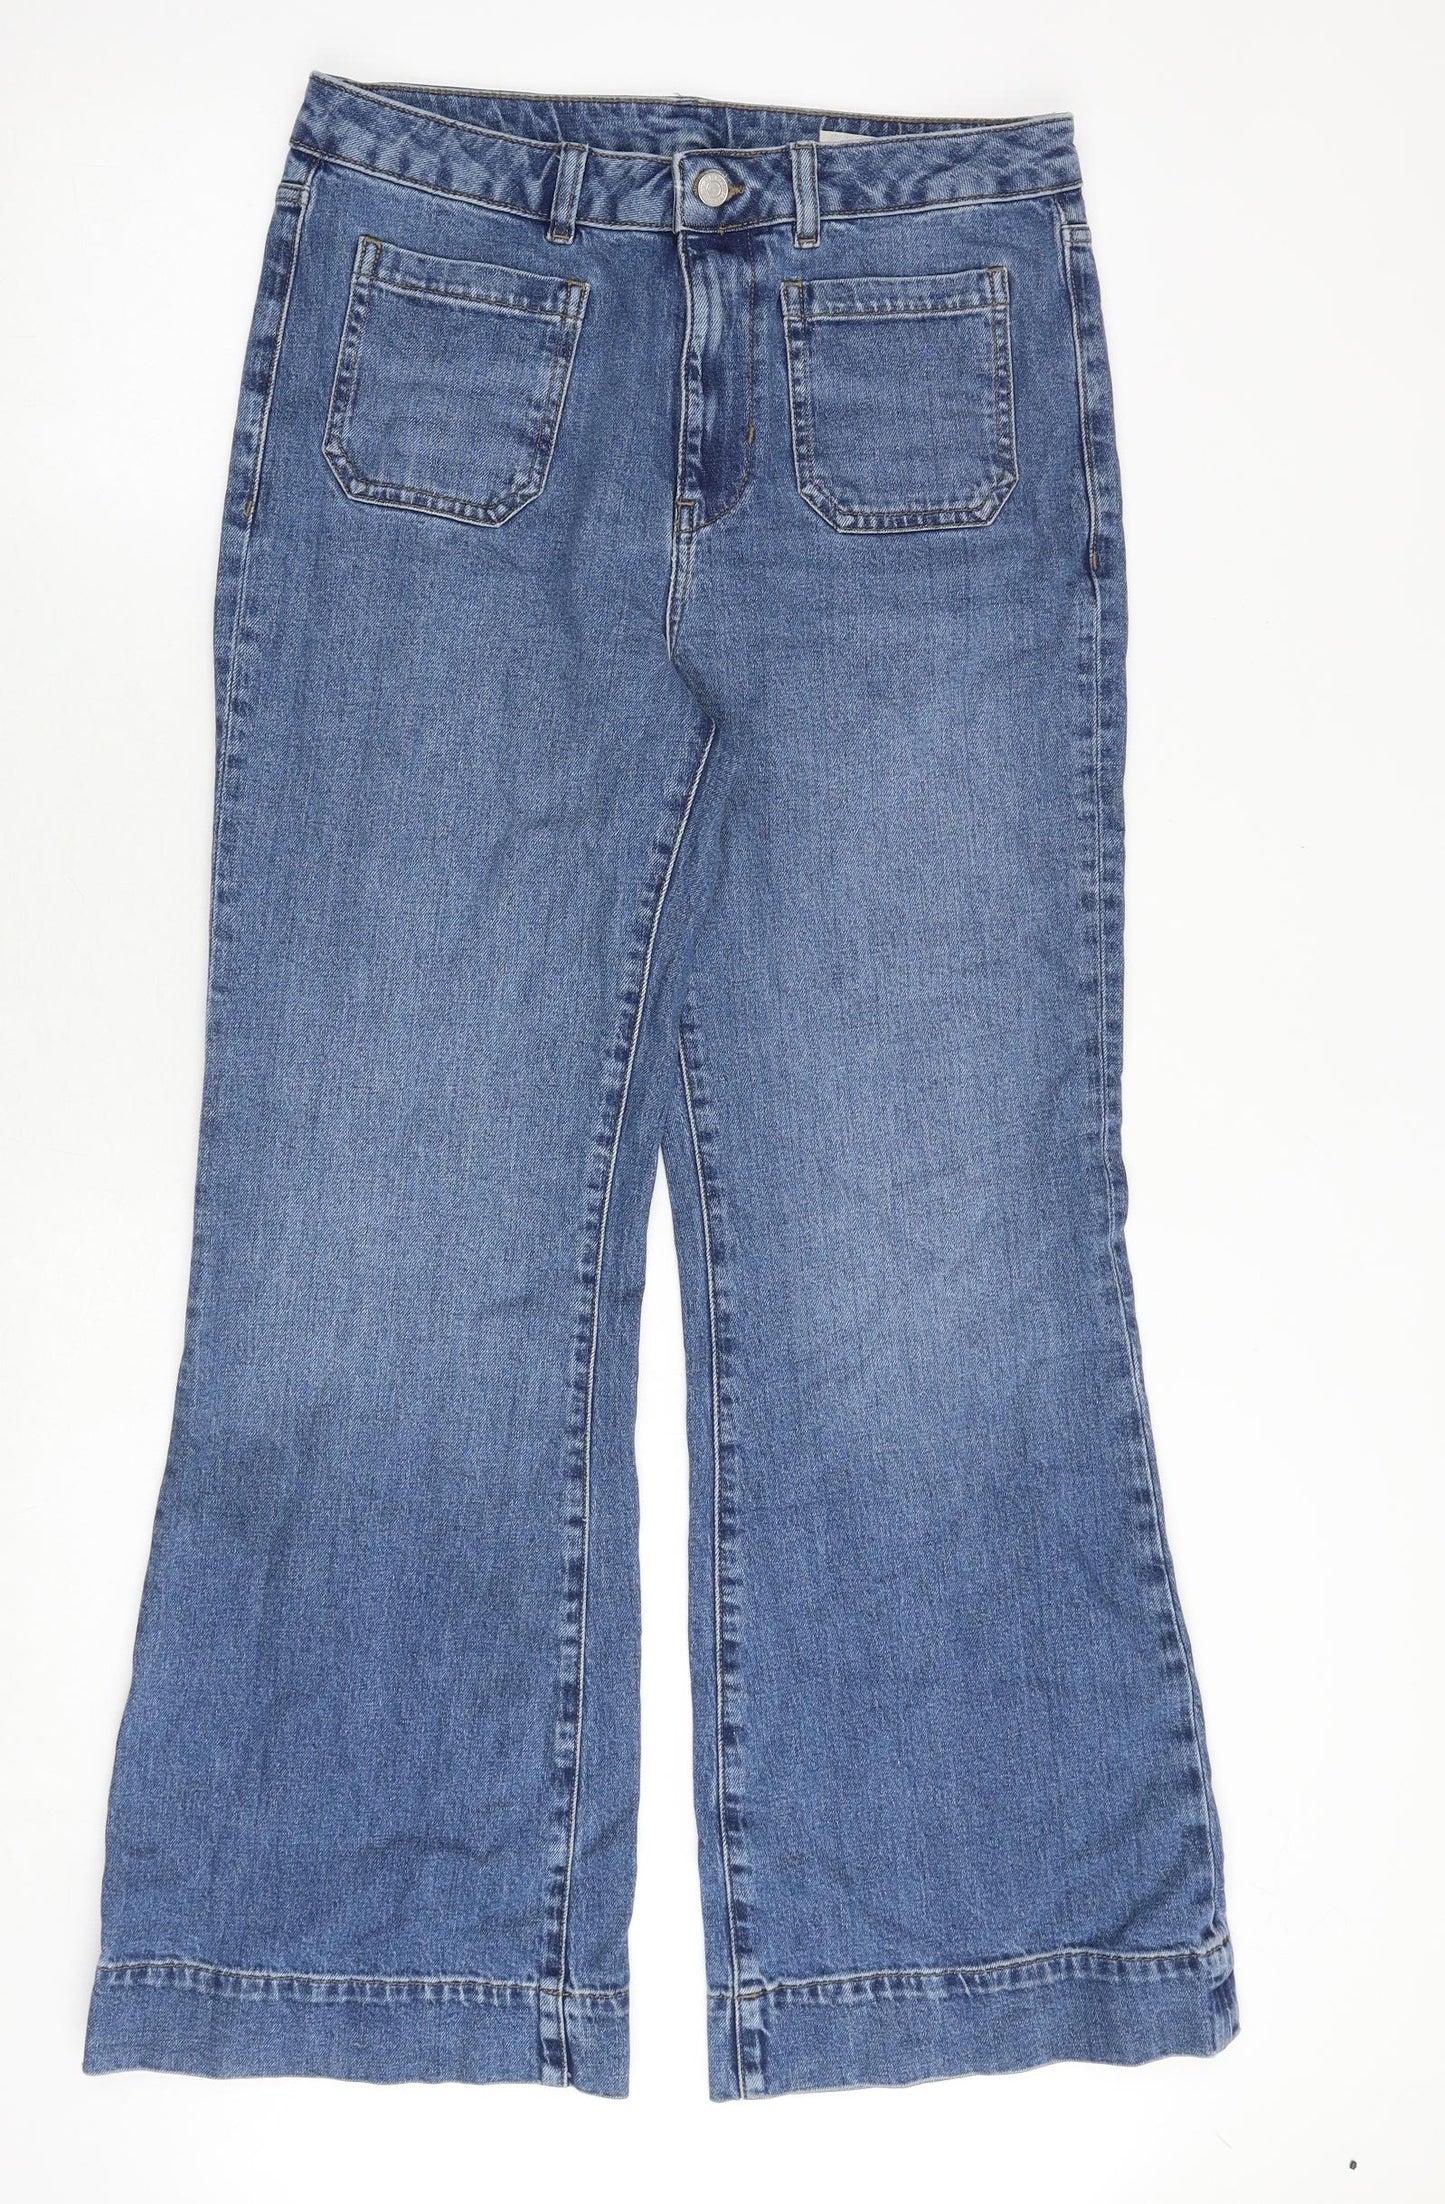 Marks and Spencer Womens Blue Cotton Bootcut Jeans Size 14 Regular Zip ...